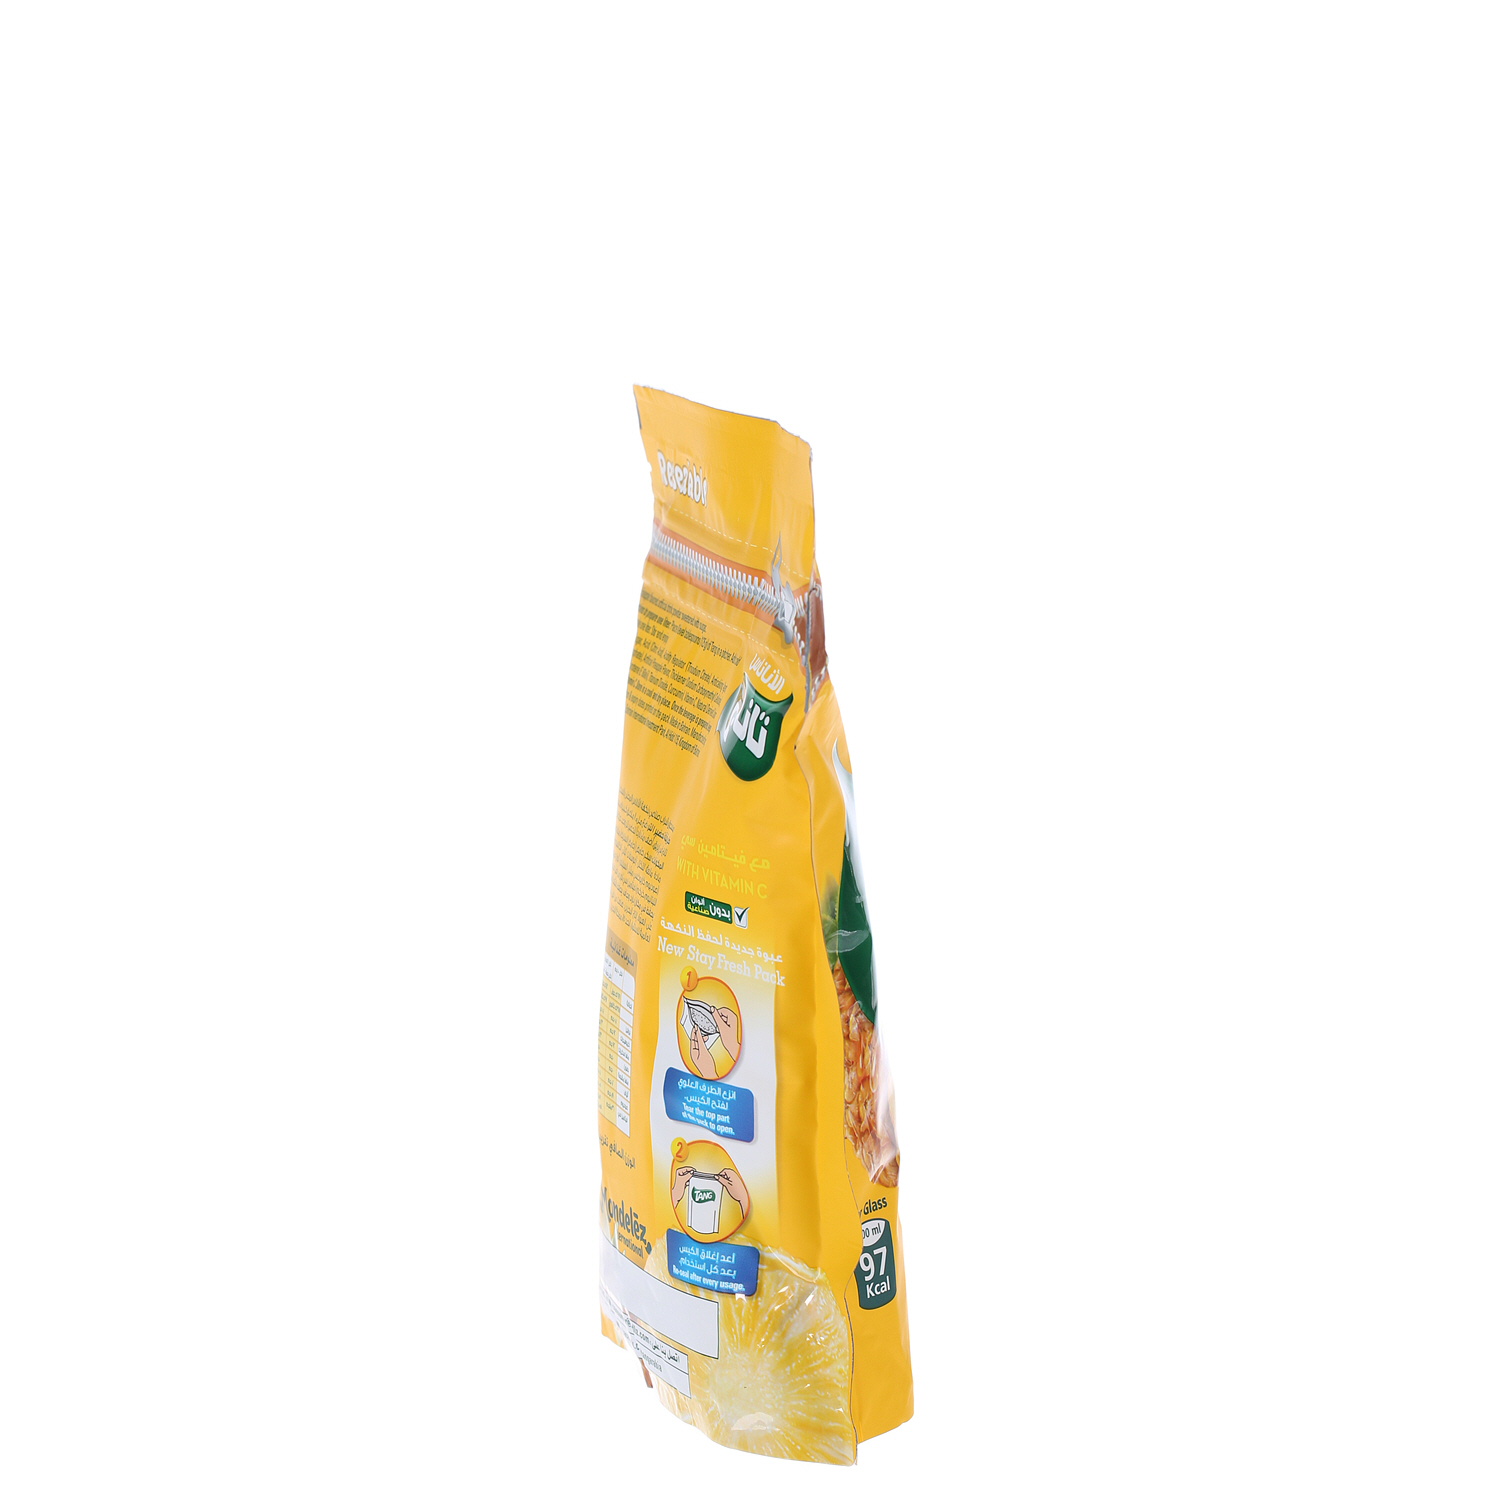 Tang Instant Drink Pineapple Poch 500gm